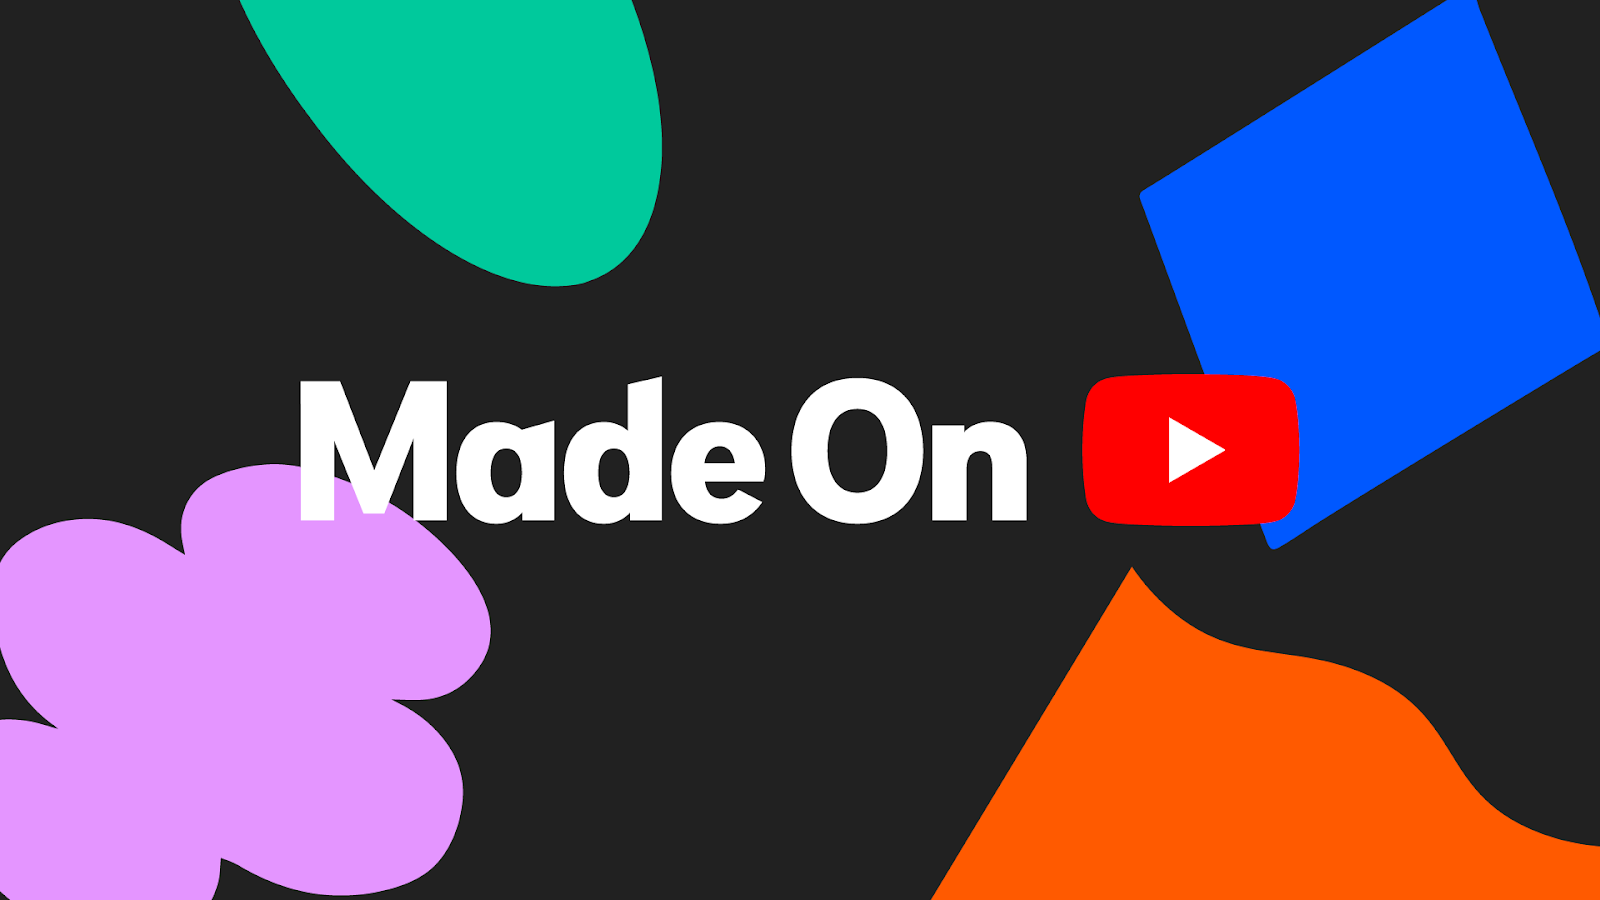 Introducing a new way for creators to share premium content with Series